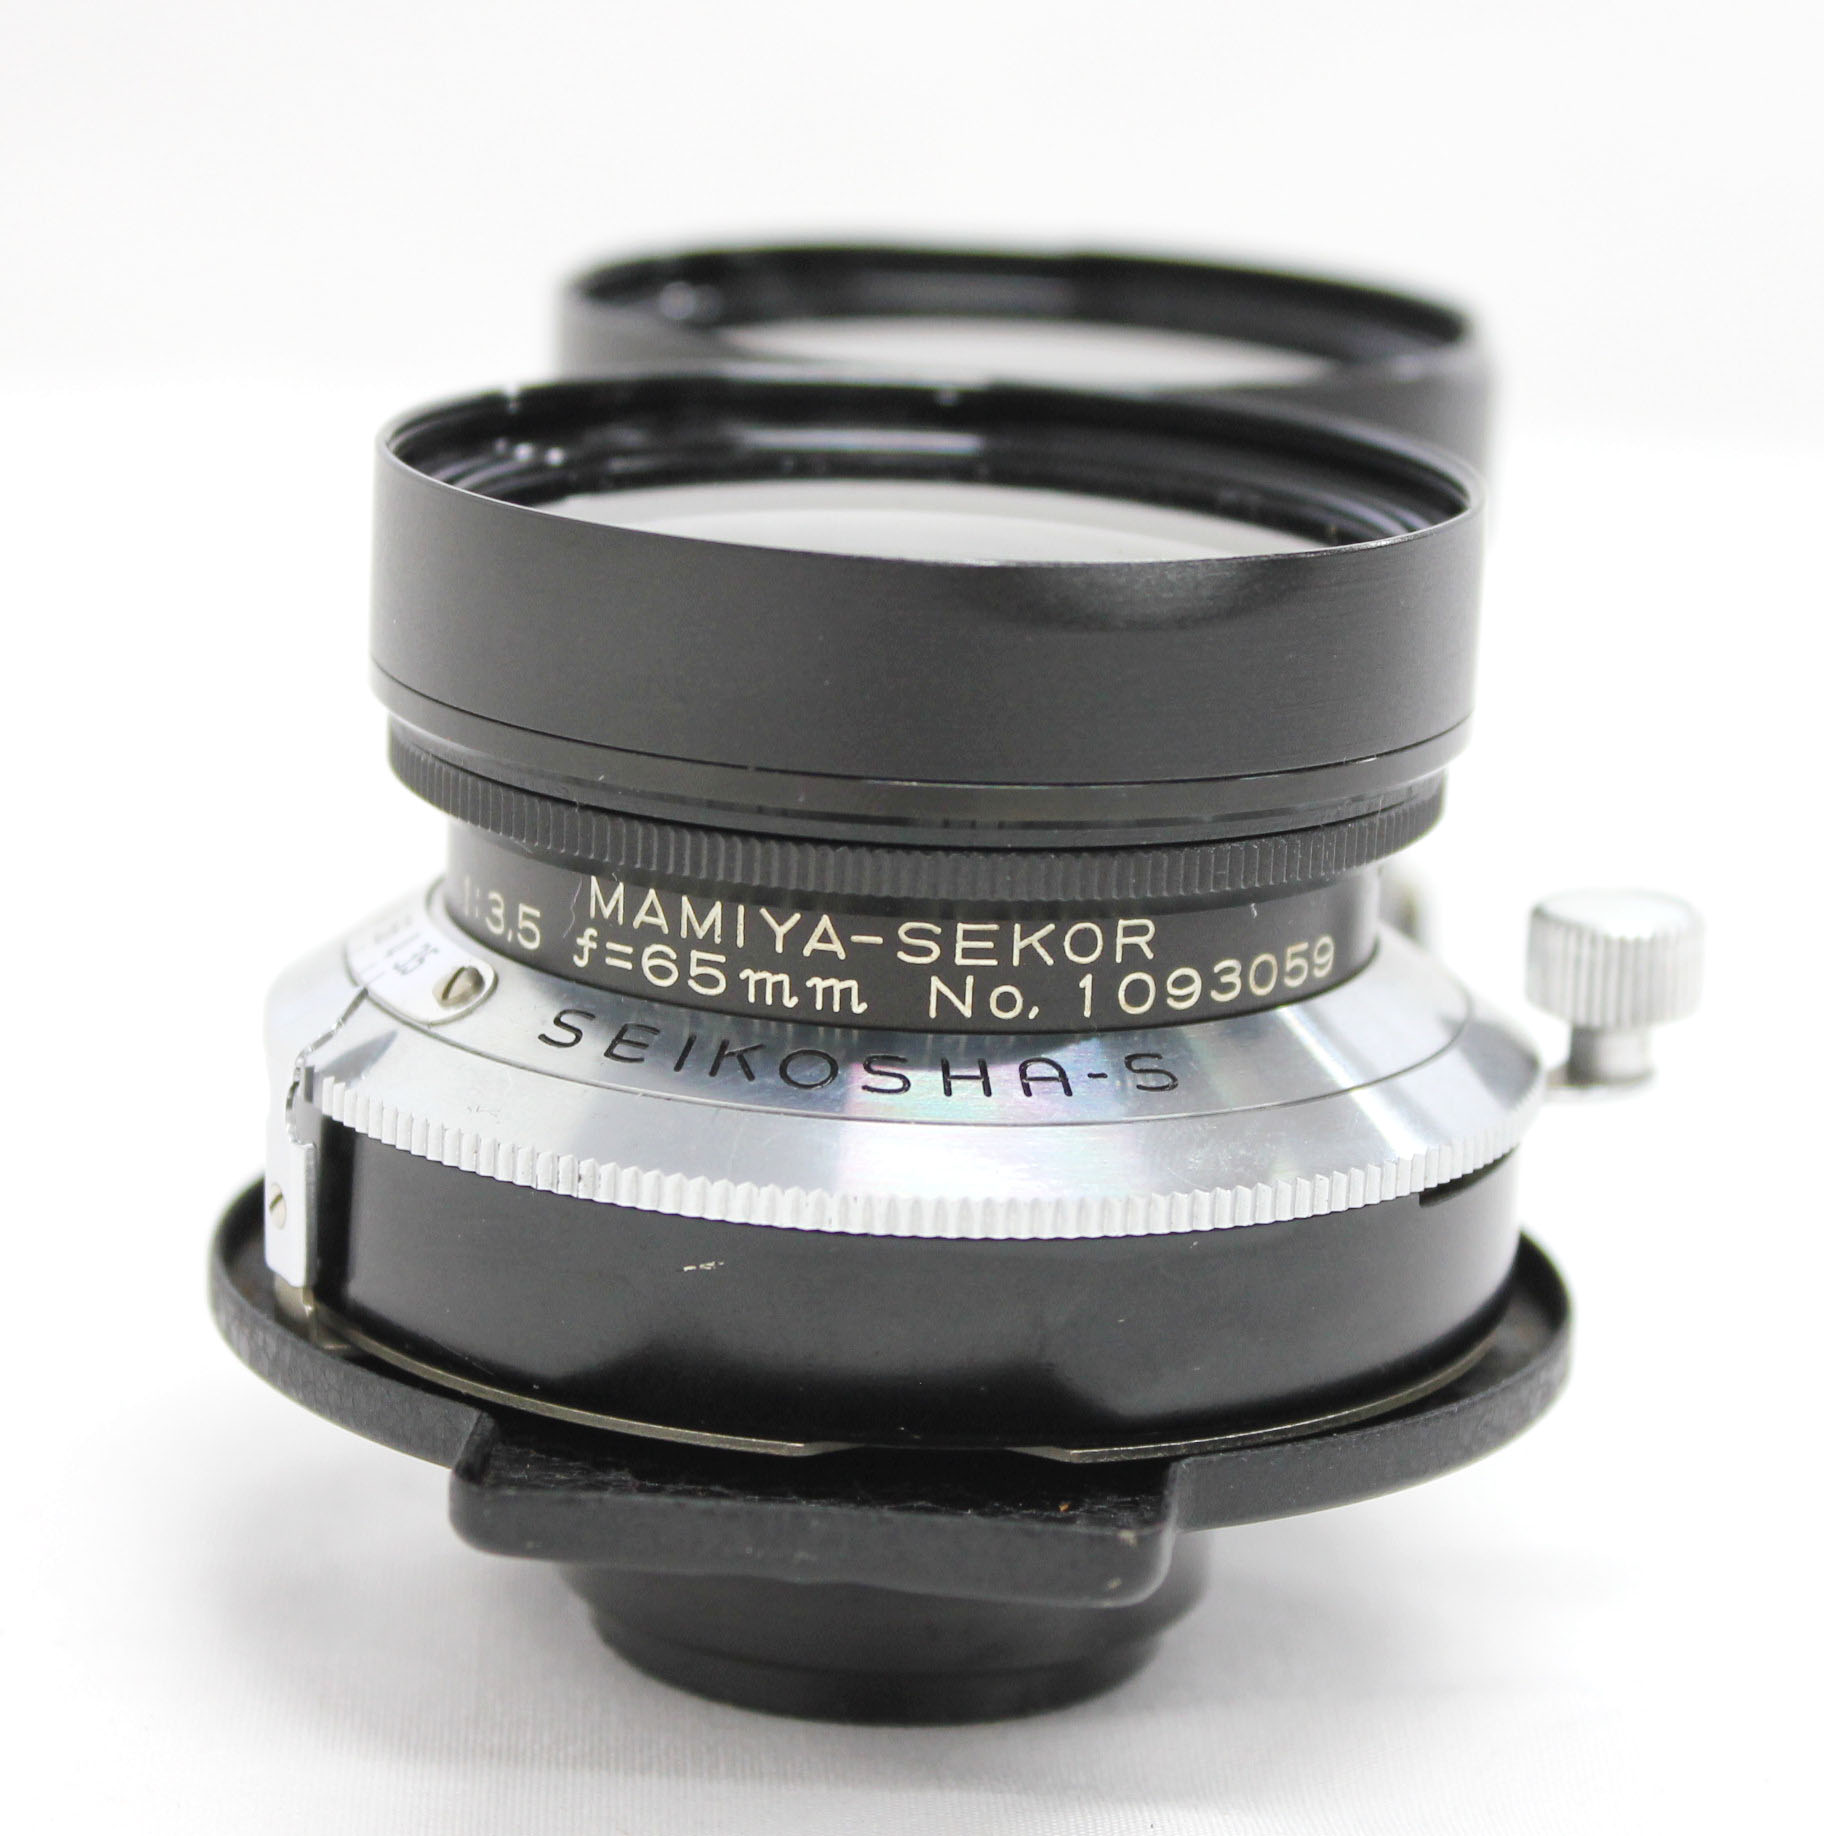 Mamiya Sekor 65mm F/3.5 TLR Lens for C3 C33 C220 C330 from Japan Photo 3